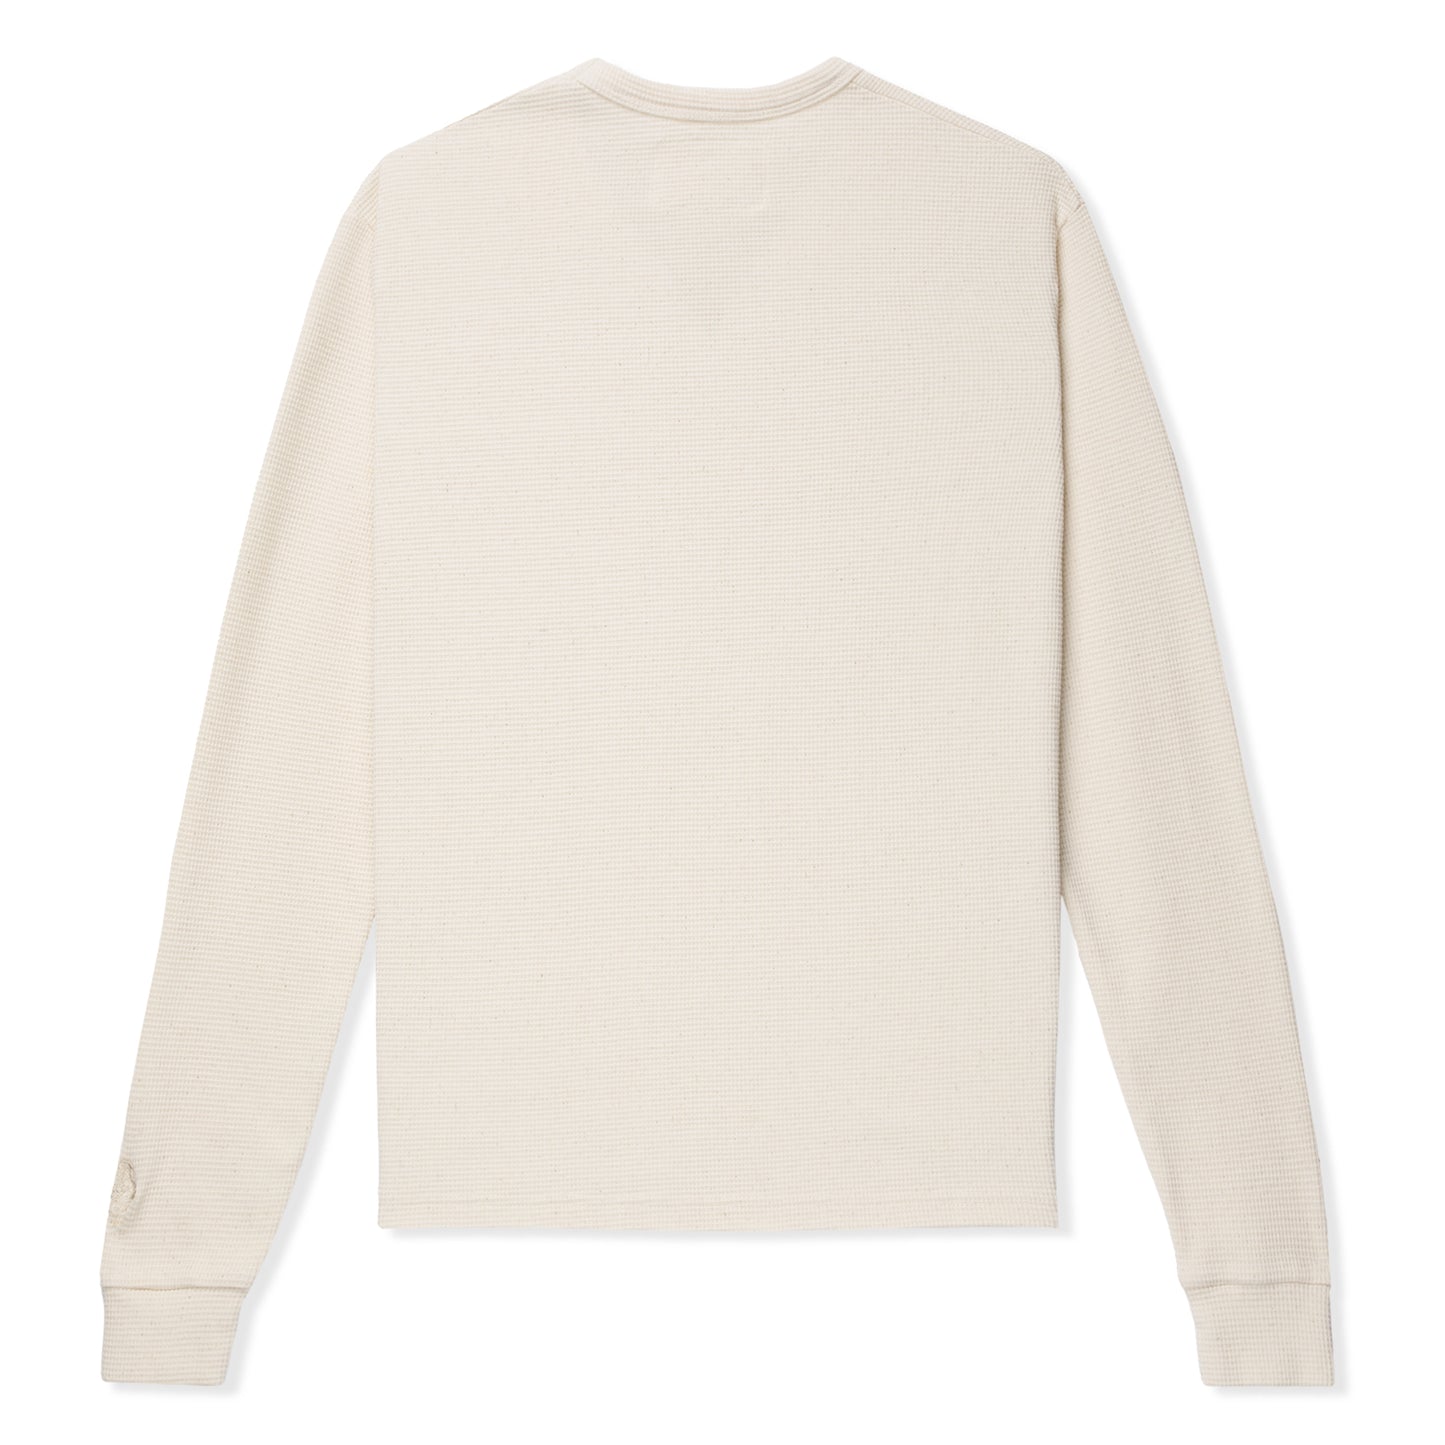 ONE OF THESE DAYS Long Sleeve Thermal (Bone)